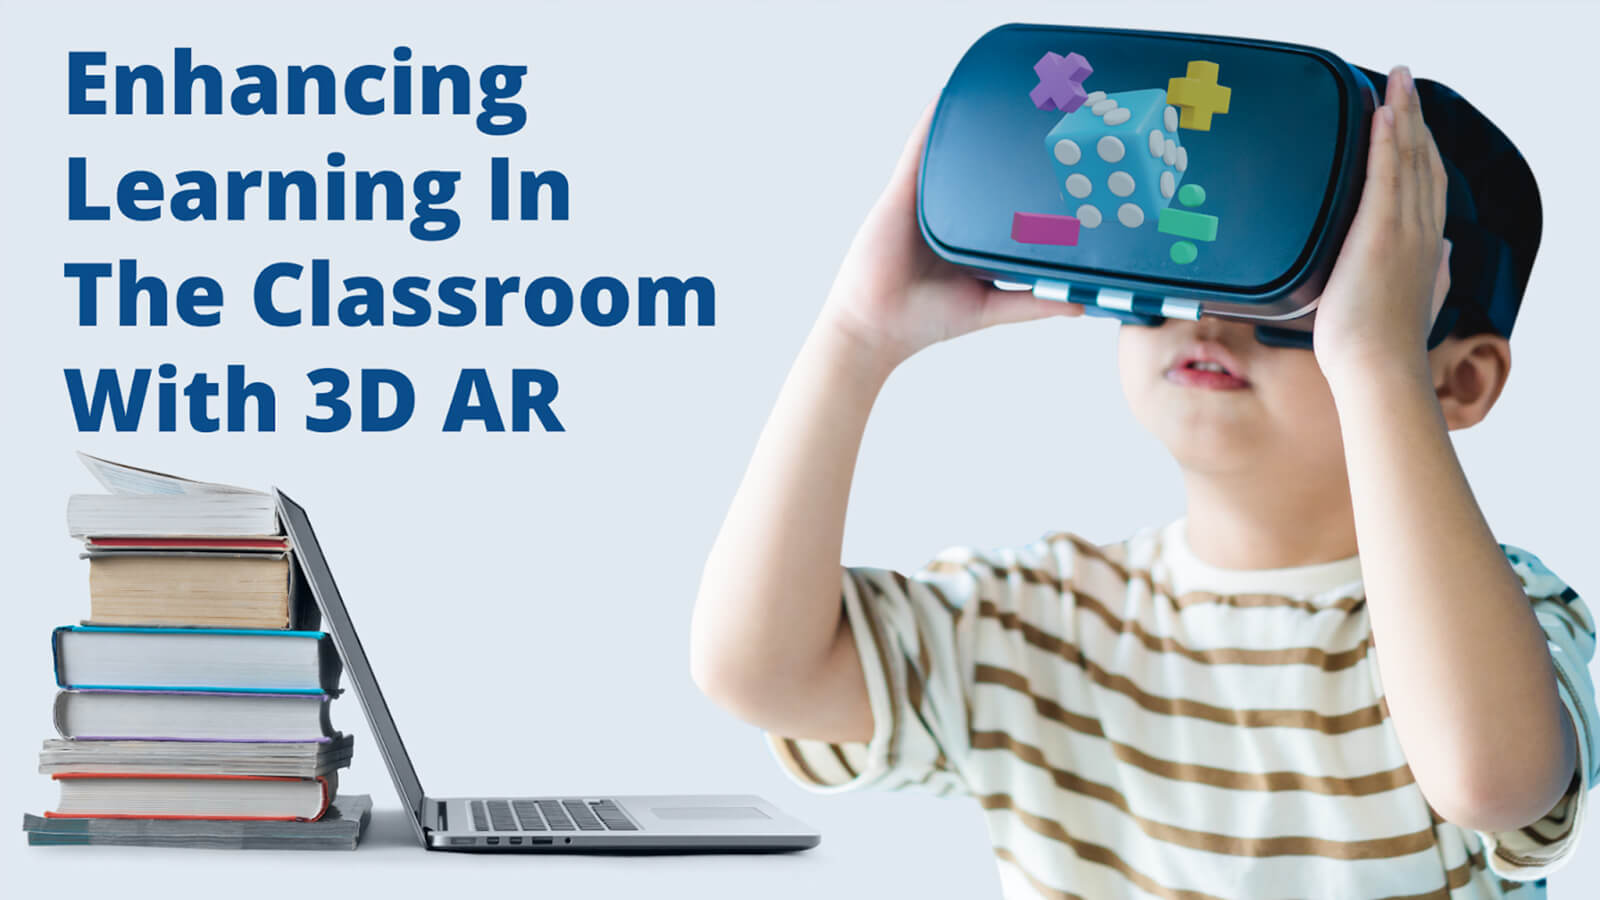 How 3D AR Can Enhance Learning in The Classroom